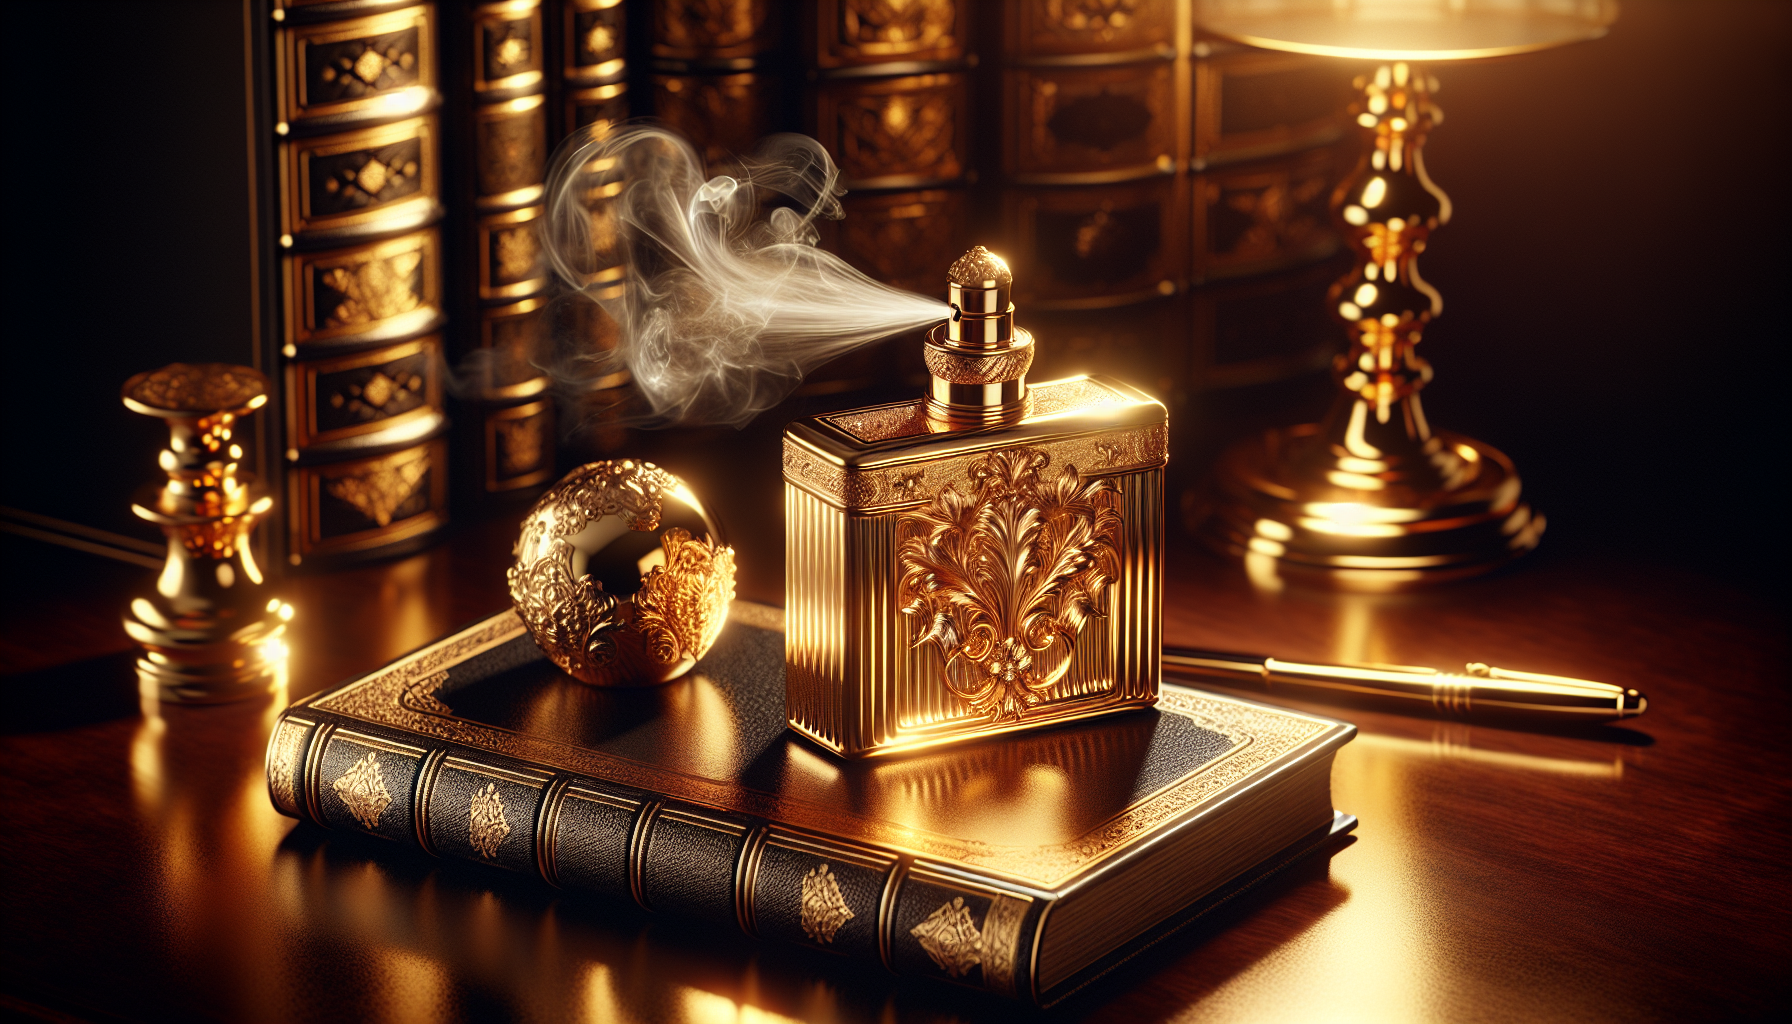 A collection of luxurious and opulent ingredients including musk, leather, and gold